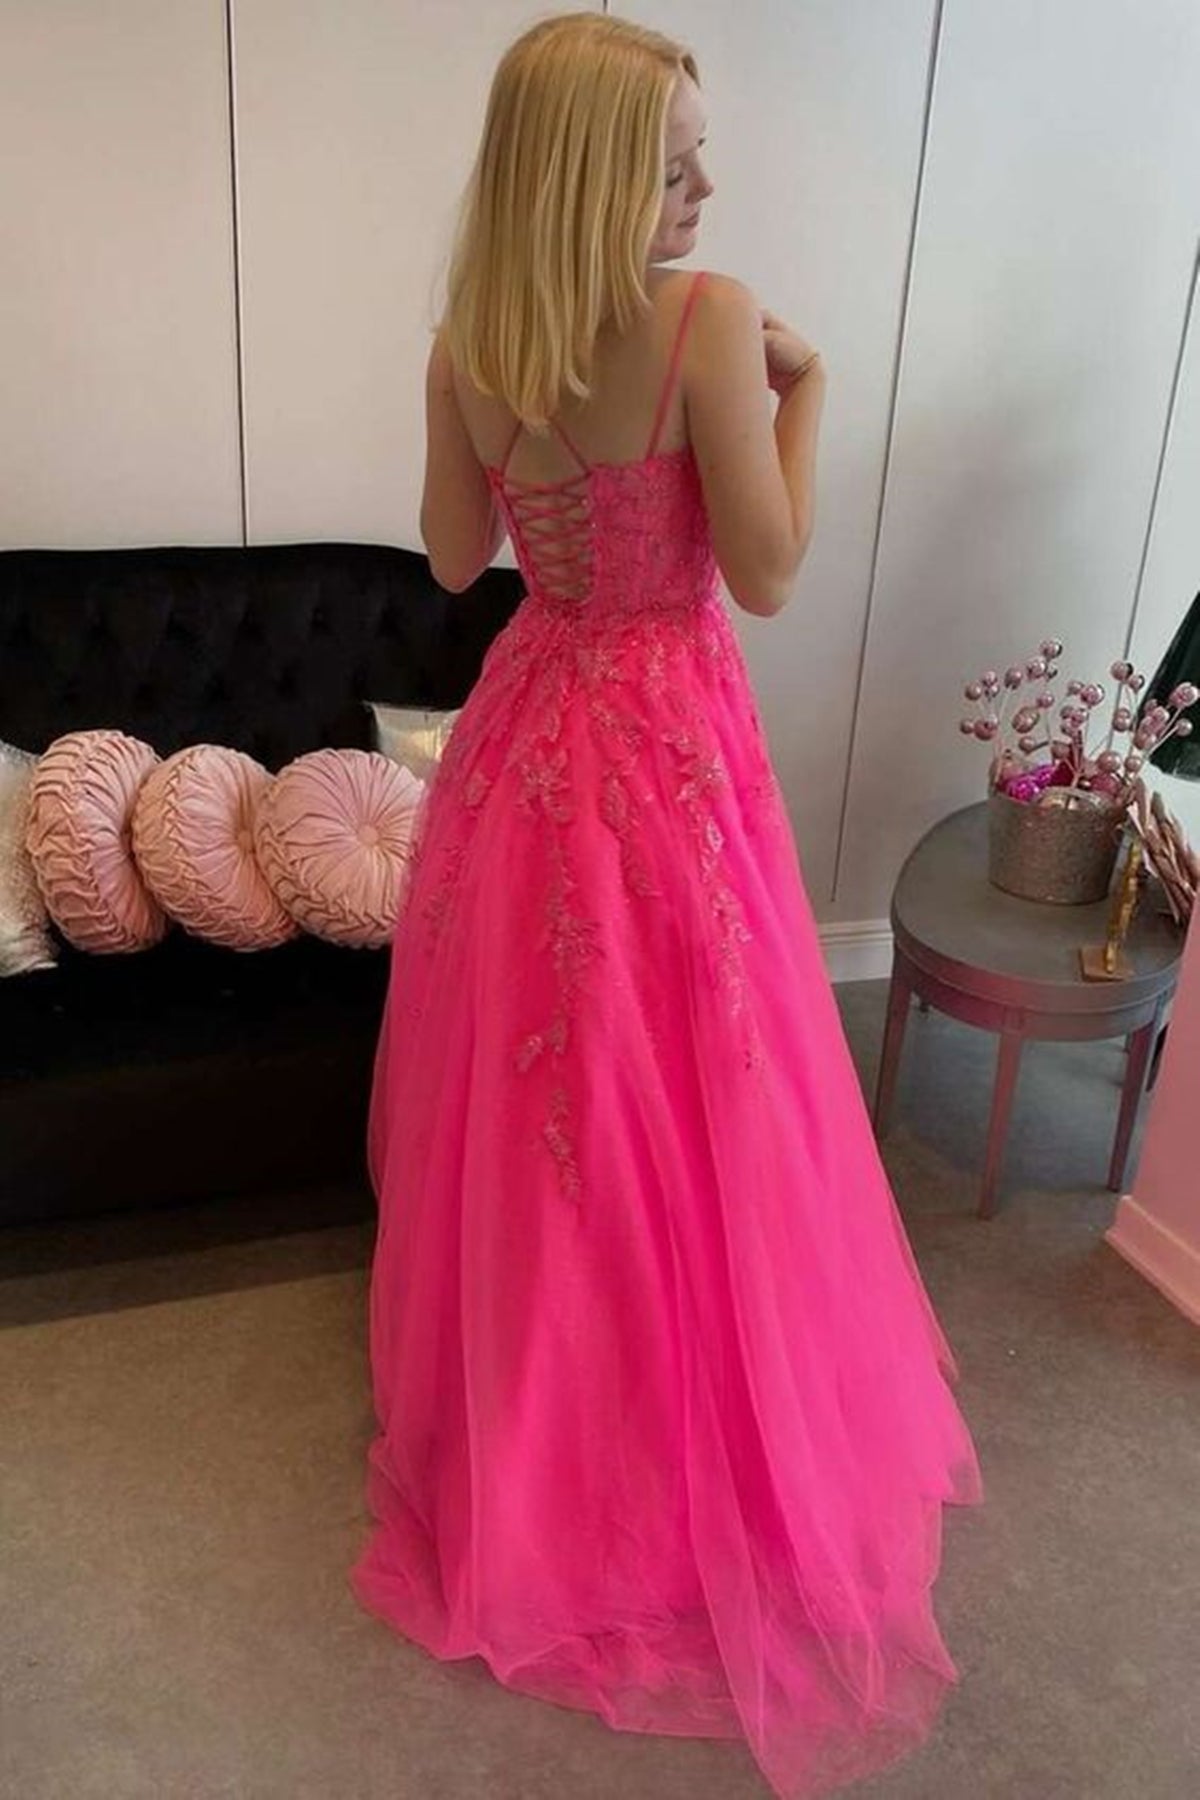 Open Back Hot Pink Tulle Lace Long Prom Dresses, Hot Pink Lace Formal Graduation Evening Dresses 